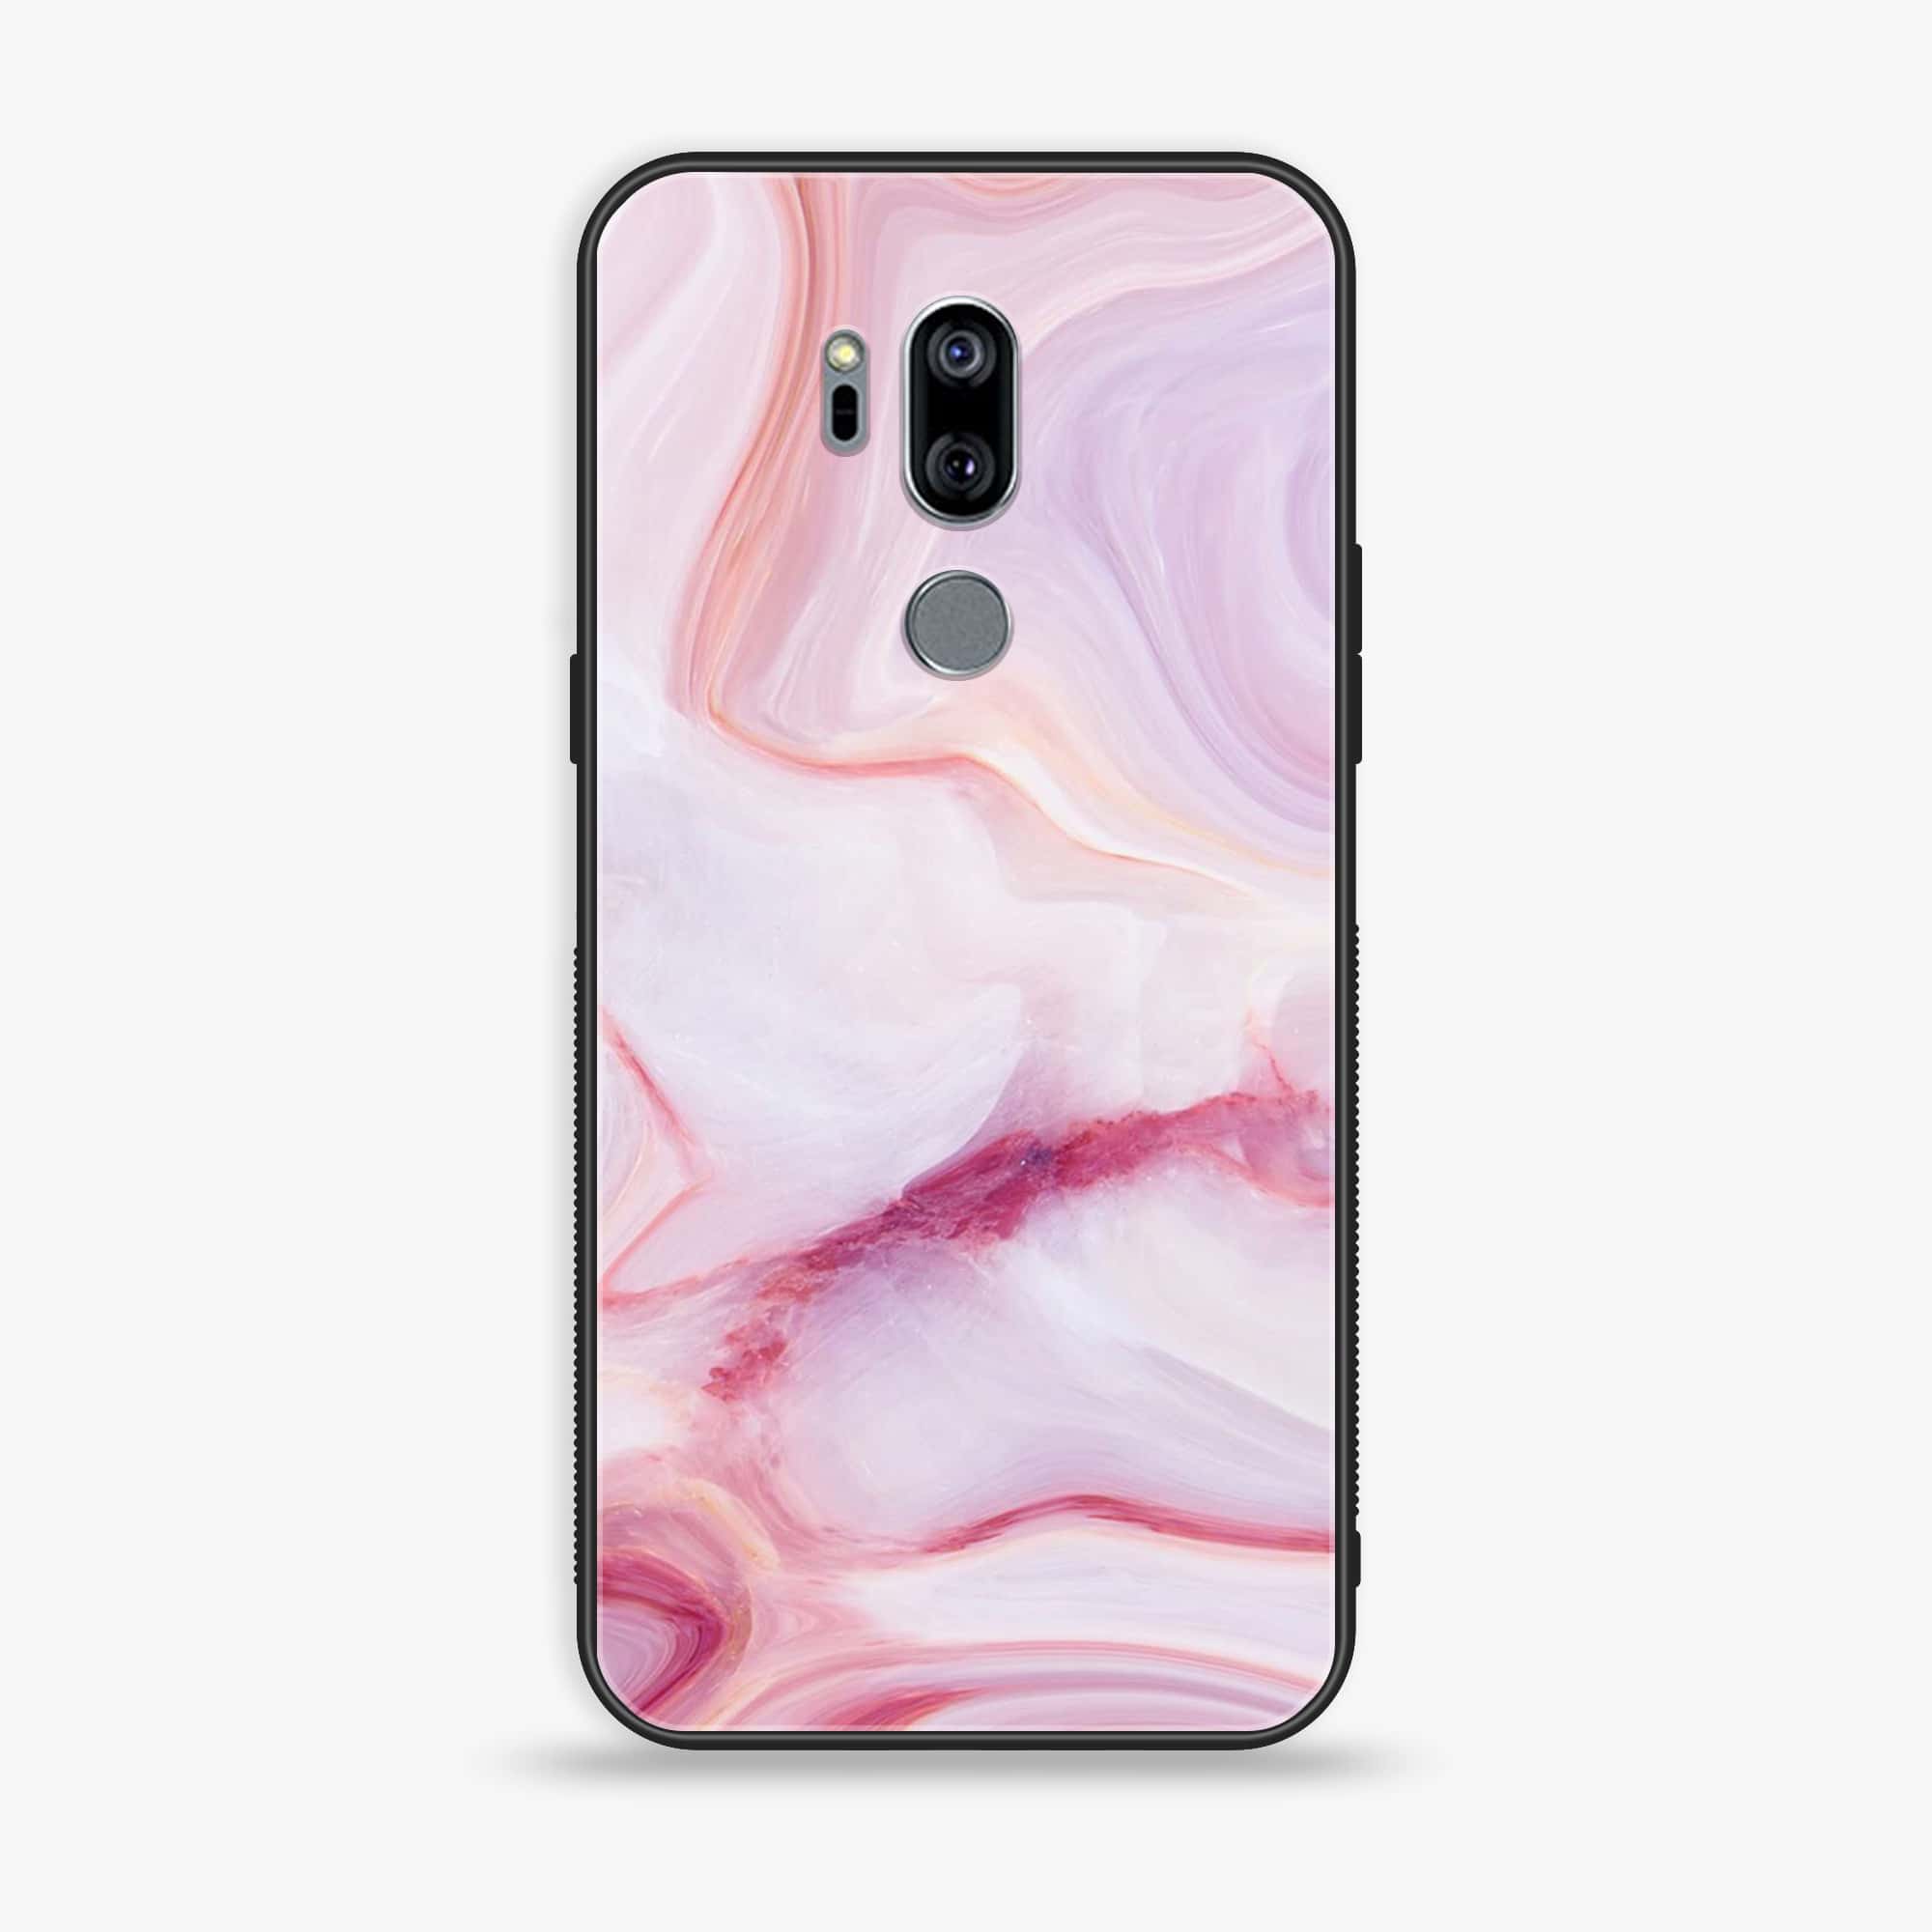 LG G7 ThinQ - Pink Marble Series - Premium Printed Glass soft Bumper shock Proof Case